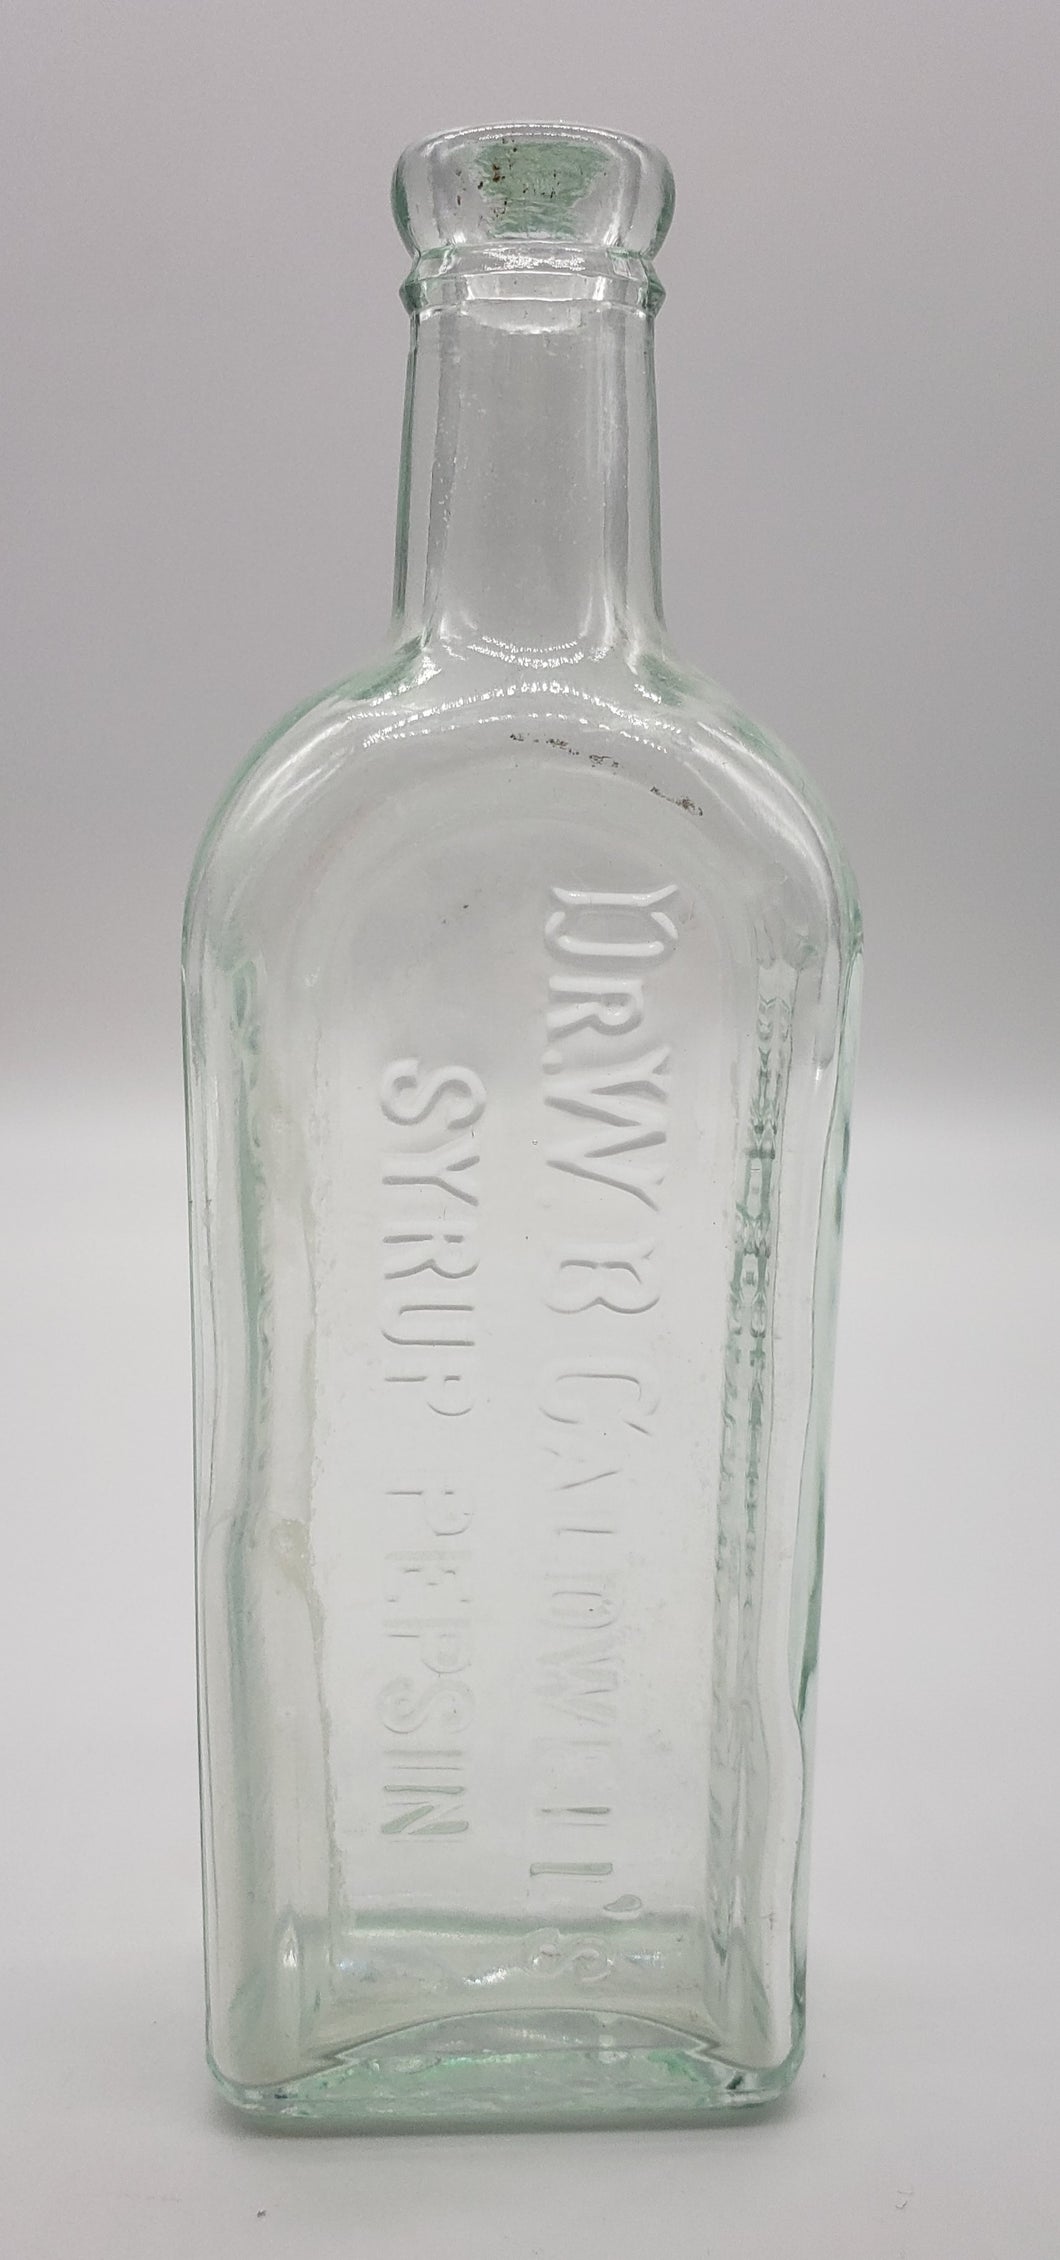 Dr. W.B. Caldwell's Syrup Pepsin glass bottle